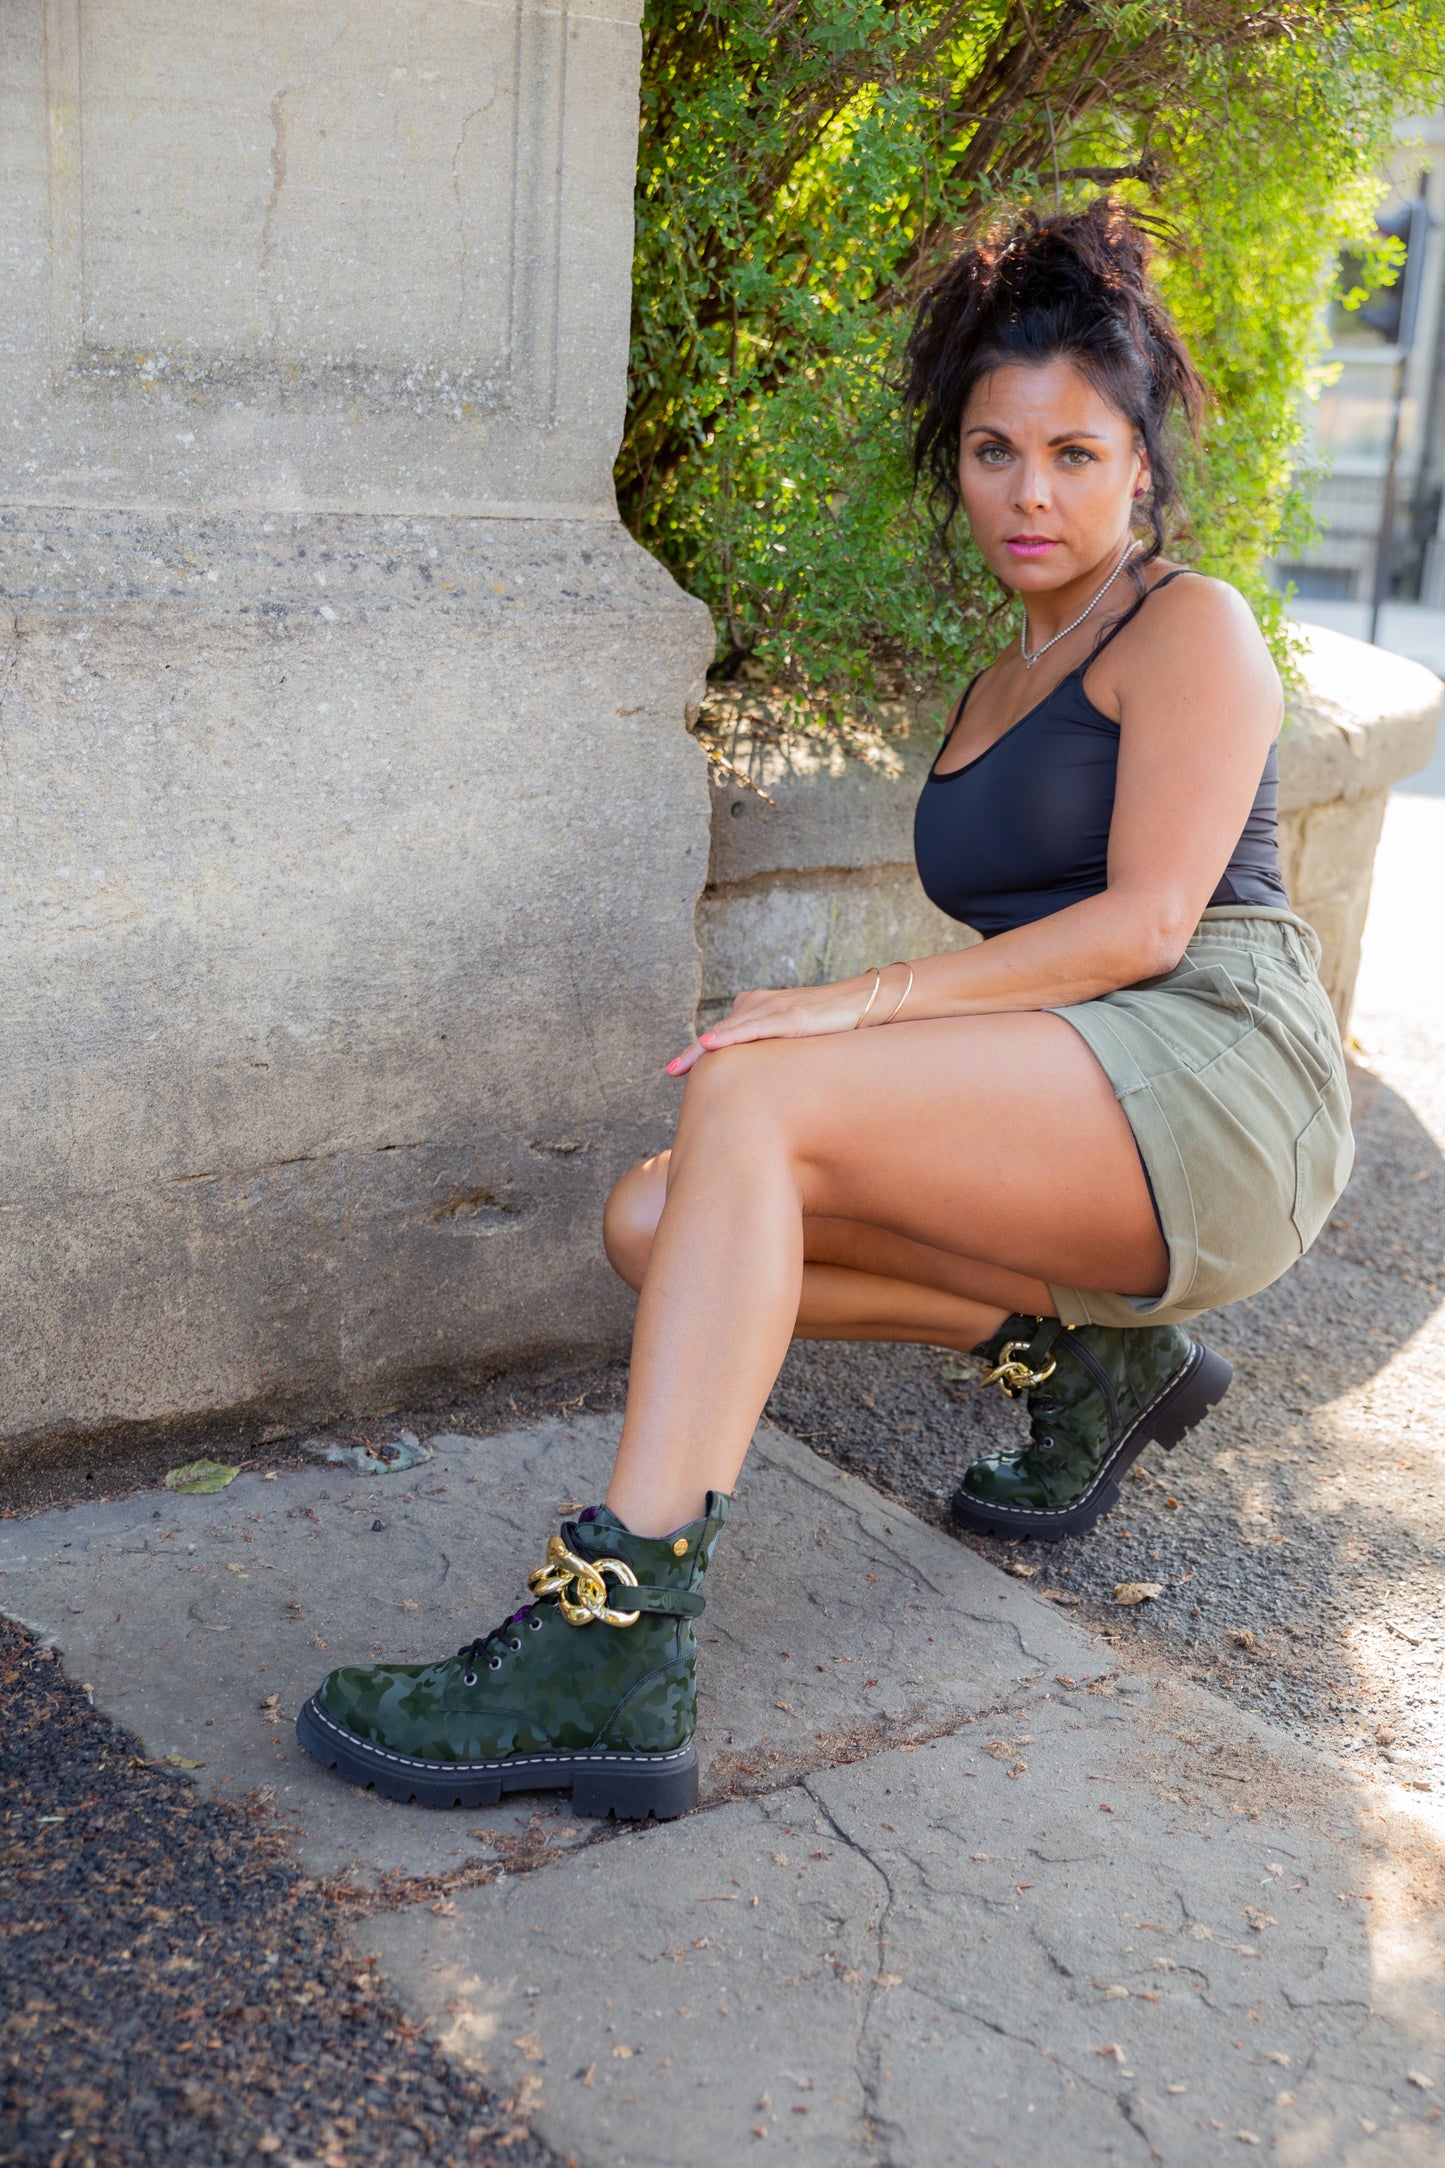 green army ankle lace boots with a unique footwear design